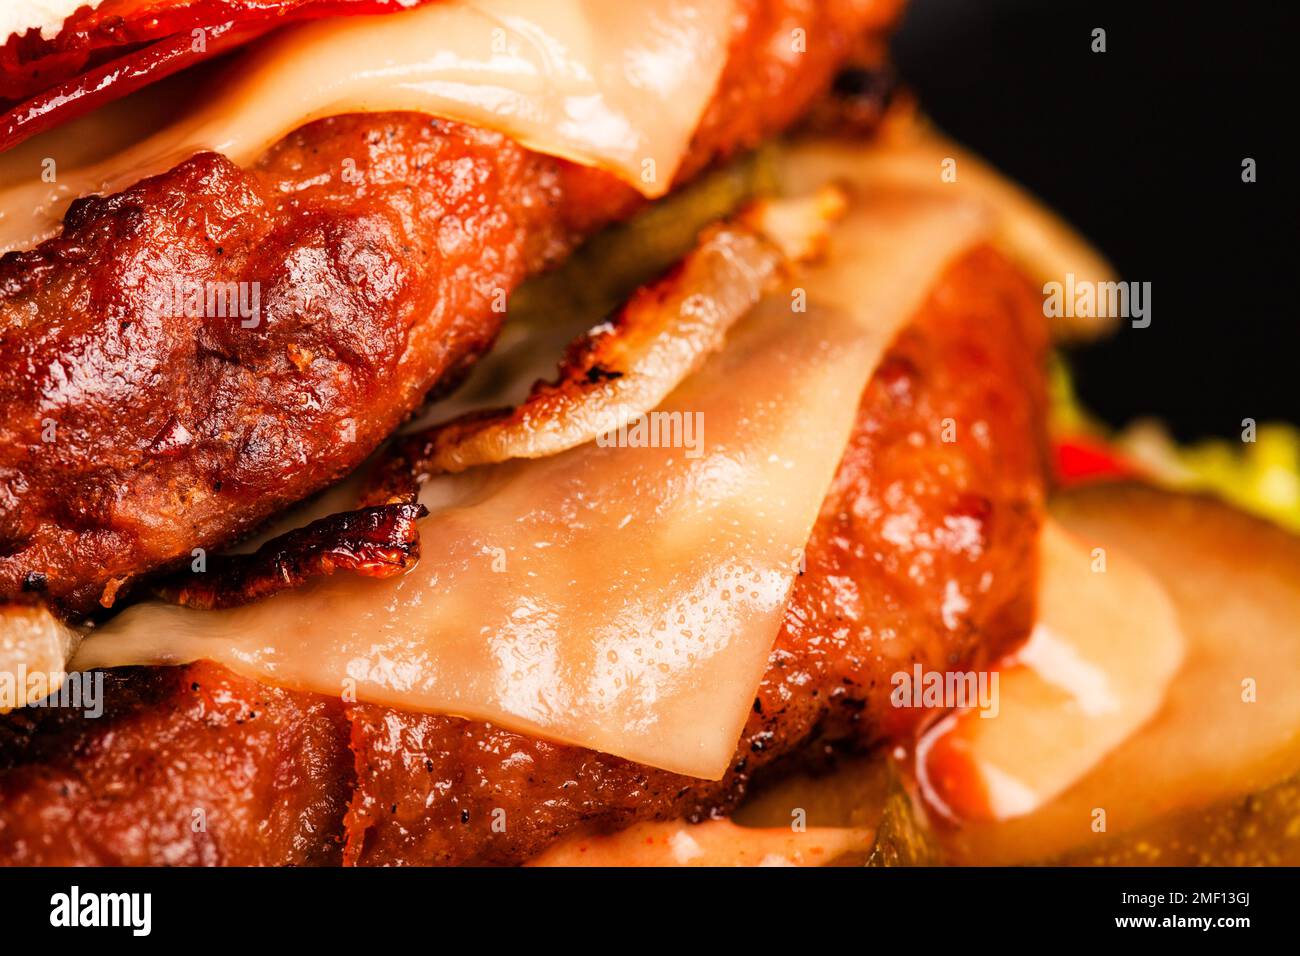 Abstract double burger with bacon cheese onions tomatoes cucumber. Against dark background. Stock Photo